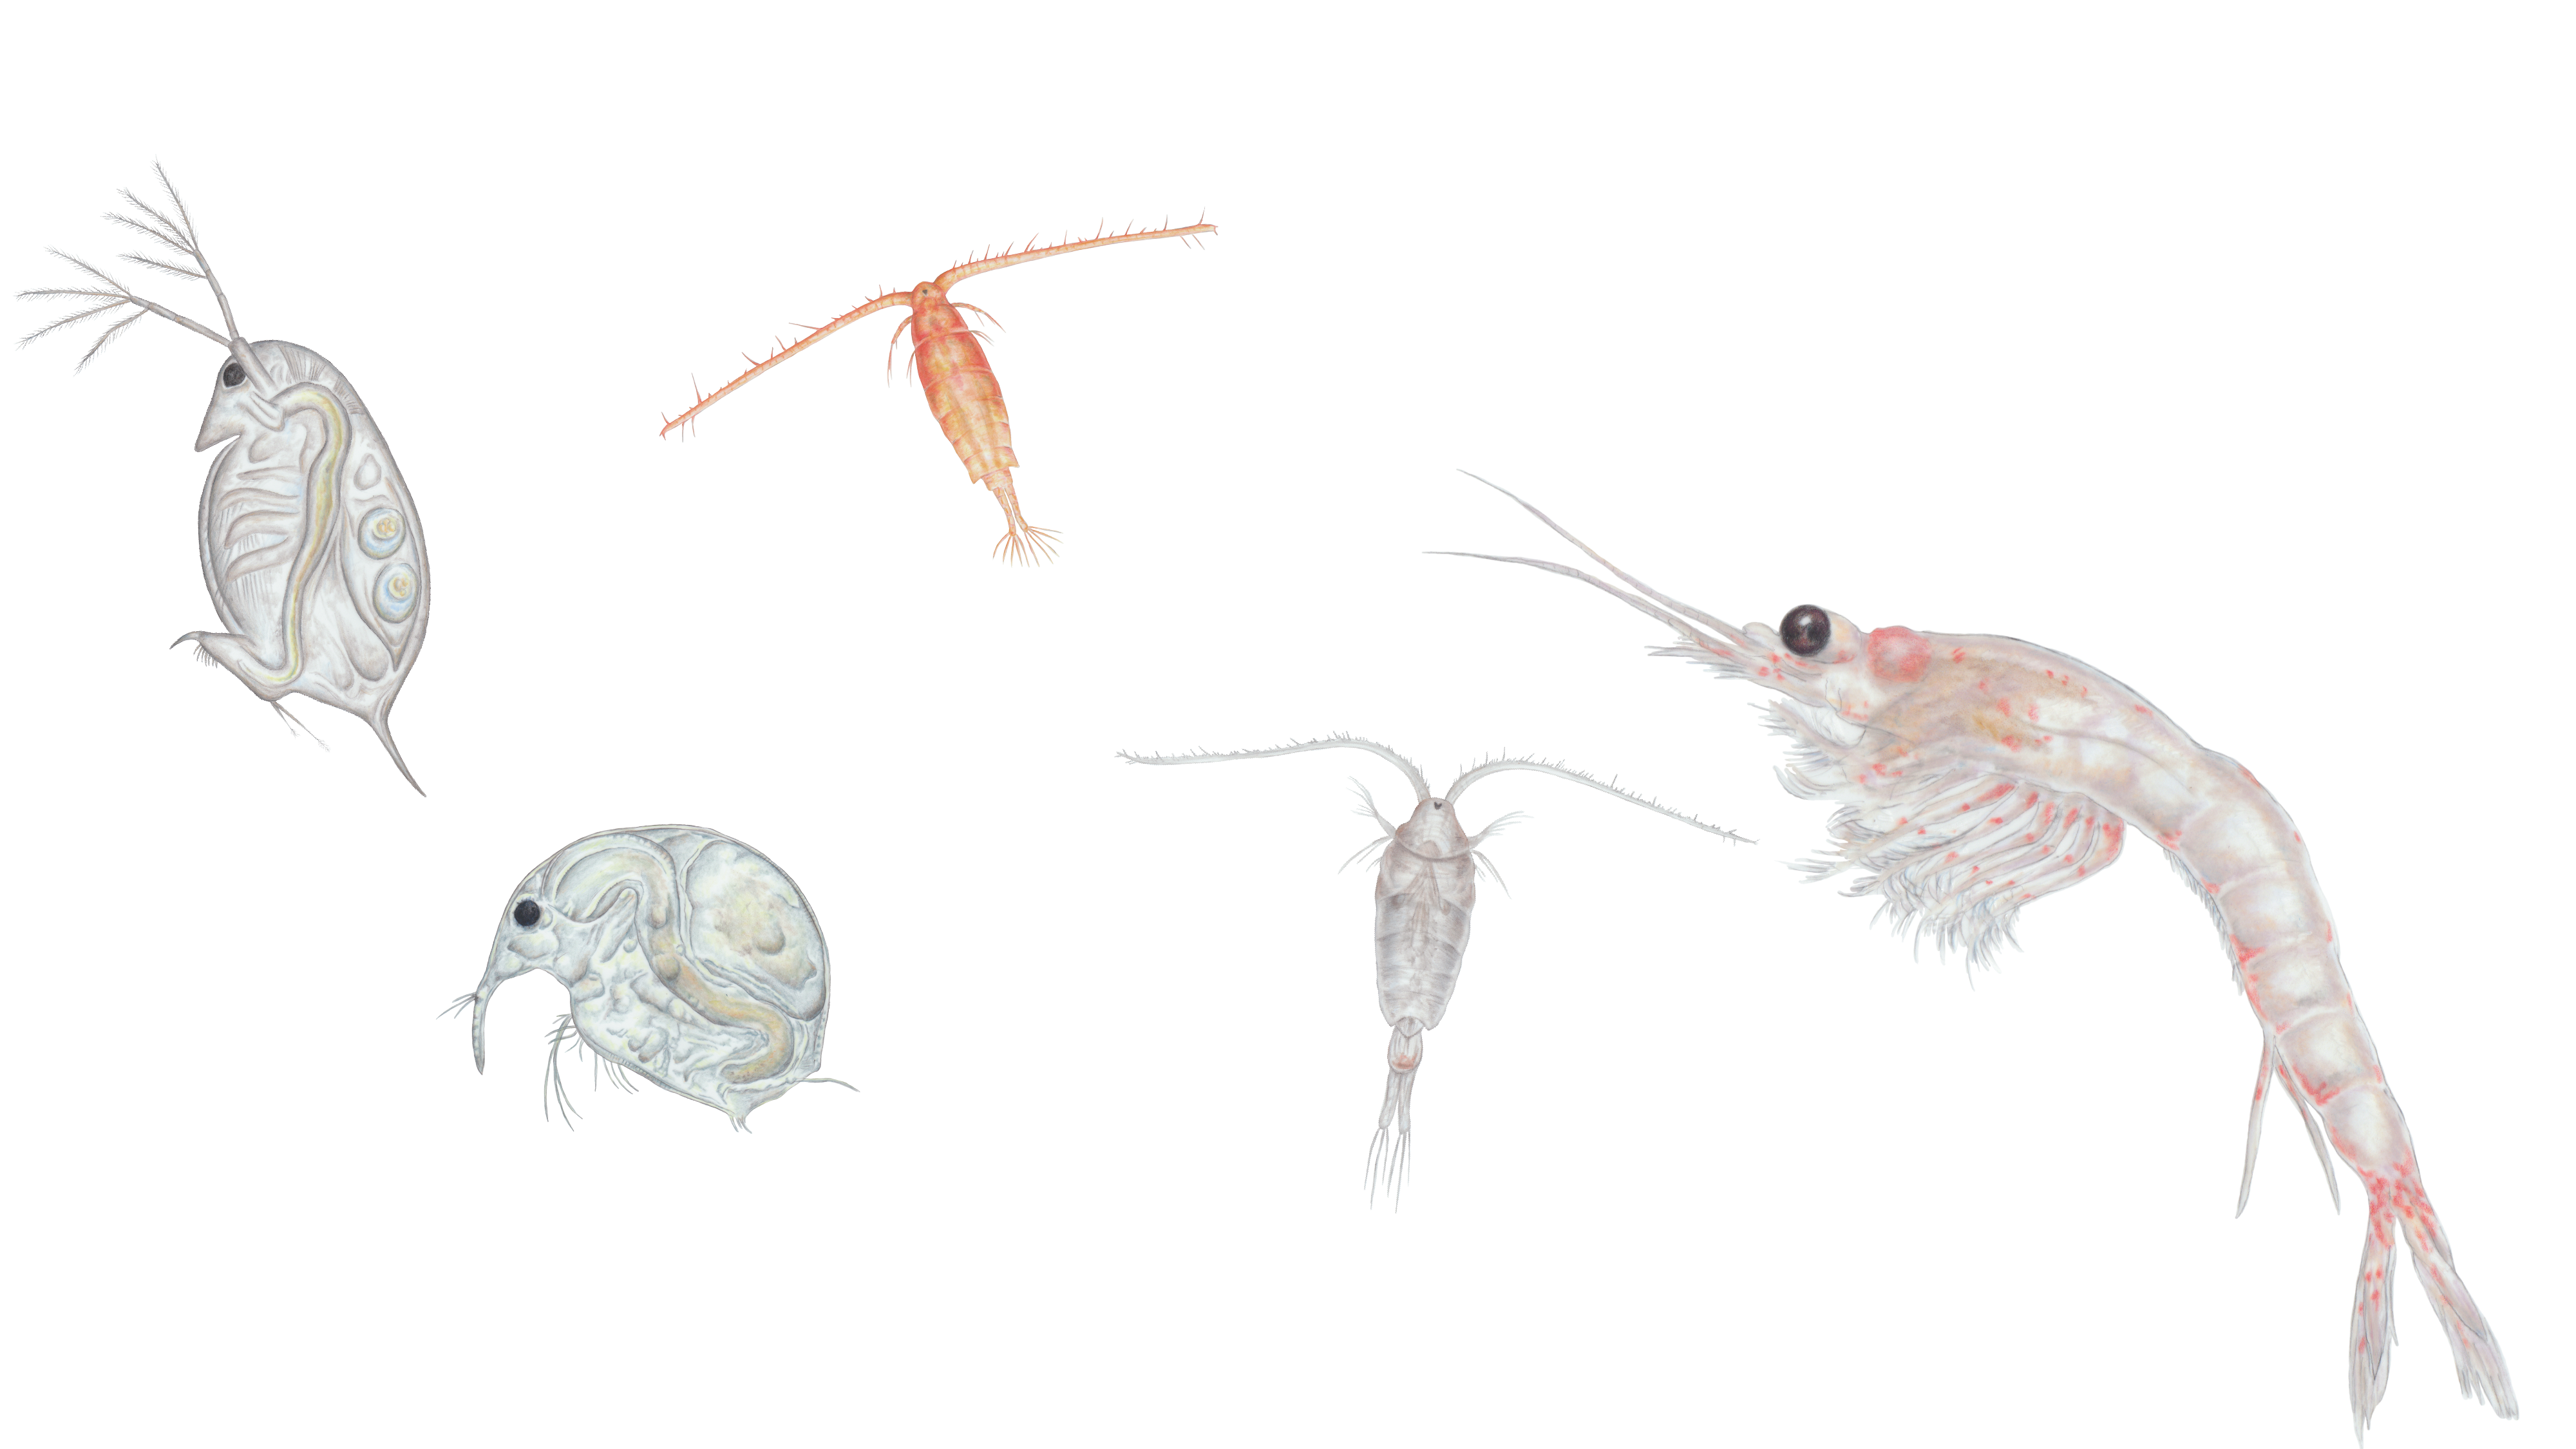 Illustrations of five species of zooplankton found in Lake Tahoe